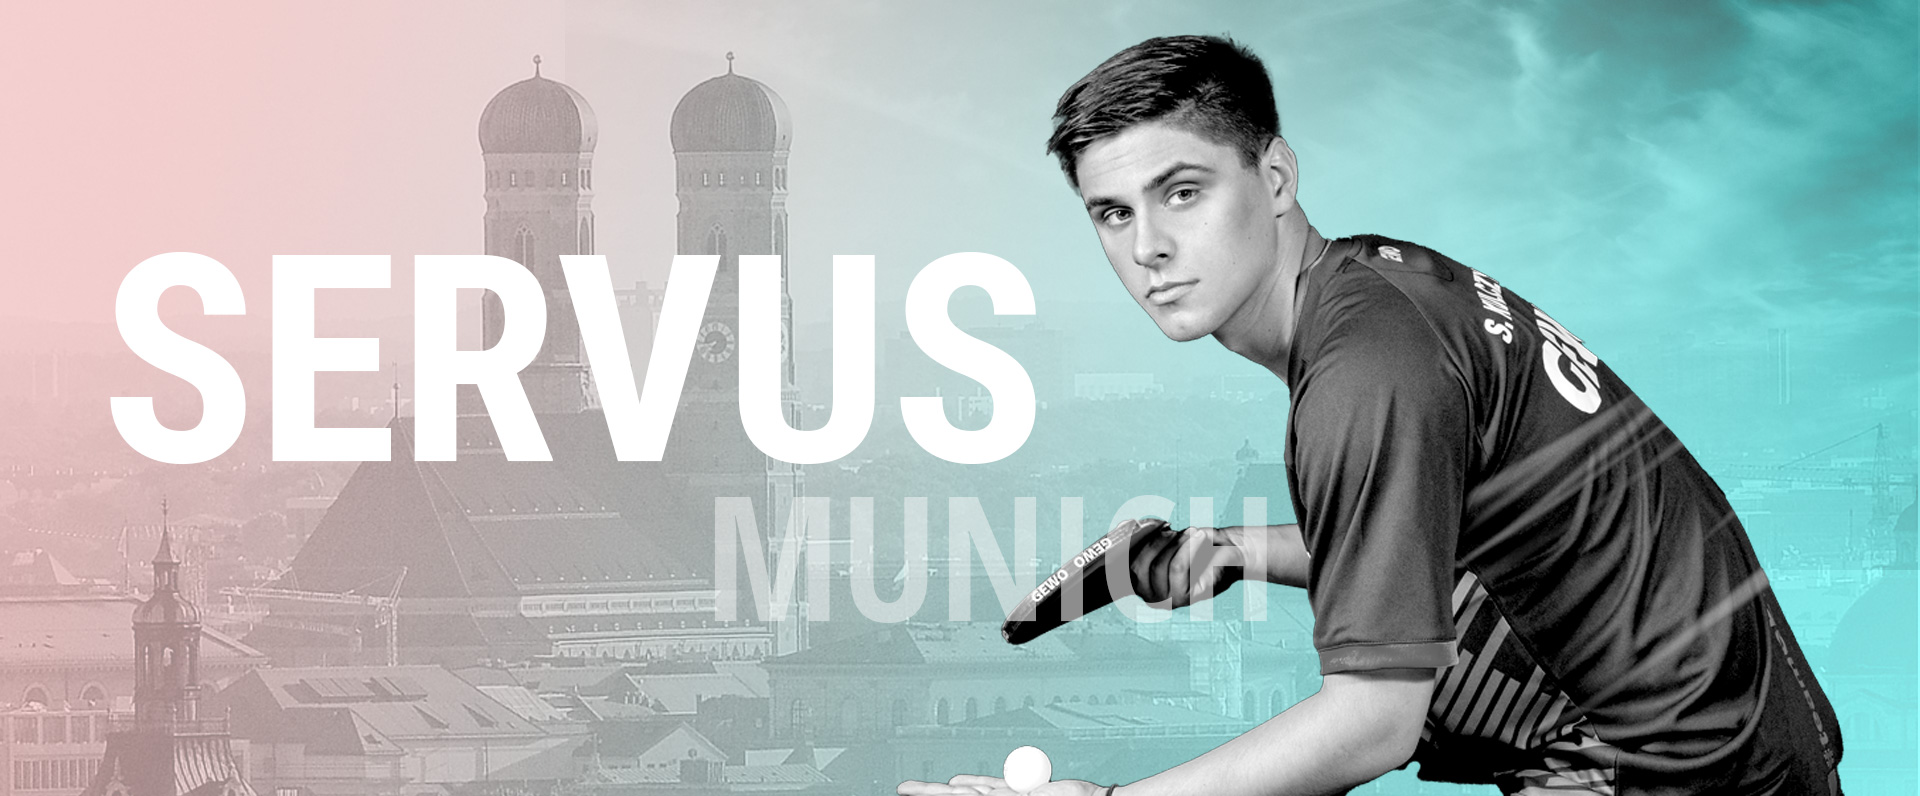 A table tennis player in front of the Munich City Hall, with the text on the picture: Servus Munich